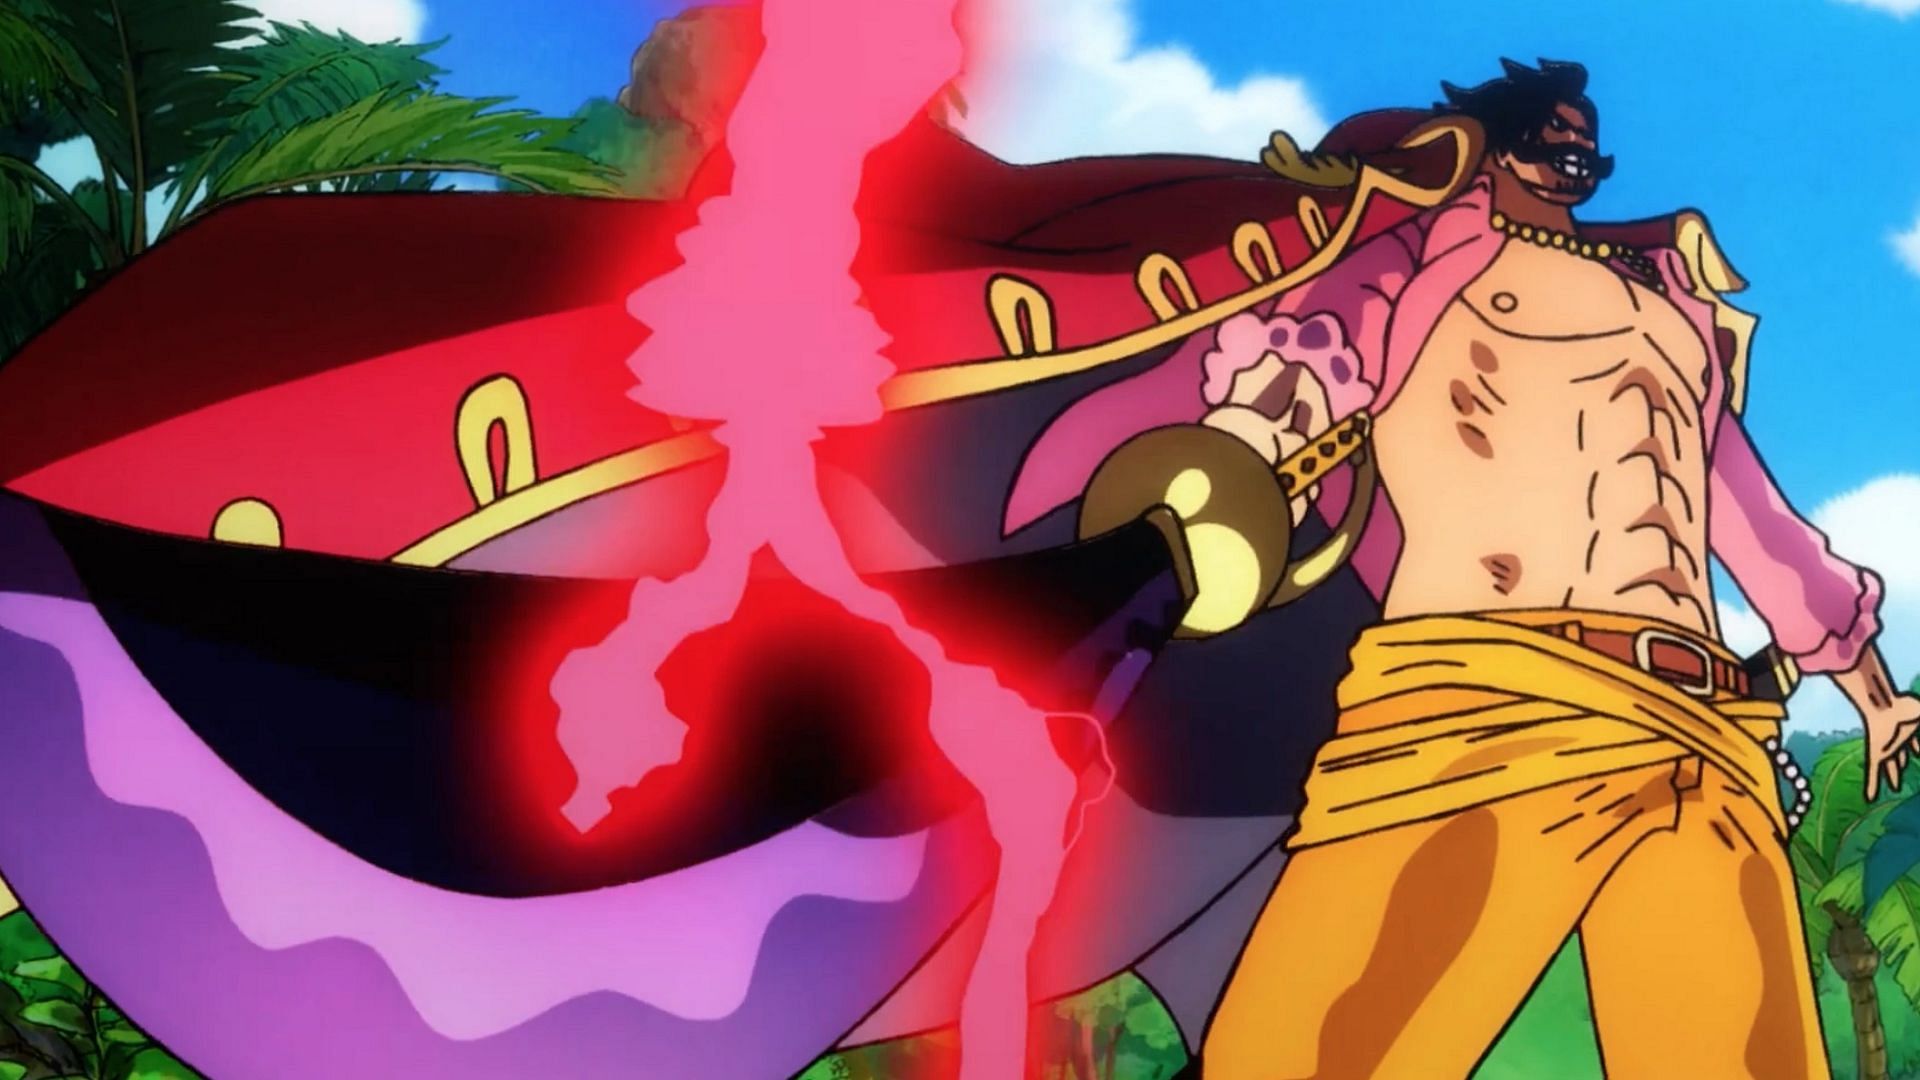 Roger wielding his sword Ace in the One Piece anime (Image via Toei Animation)